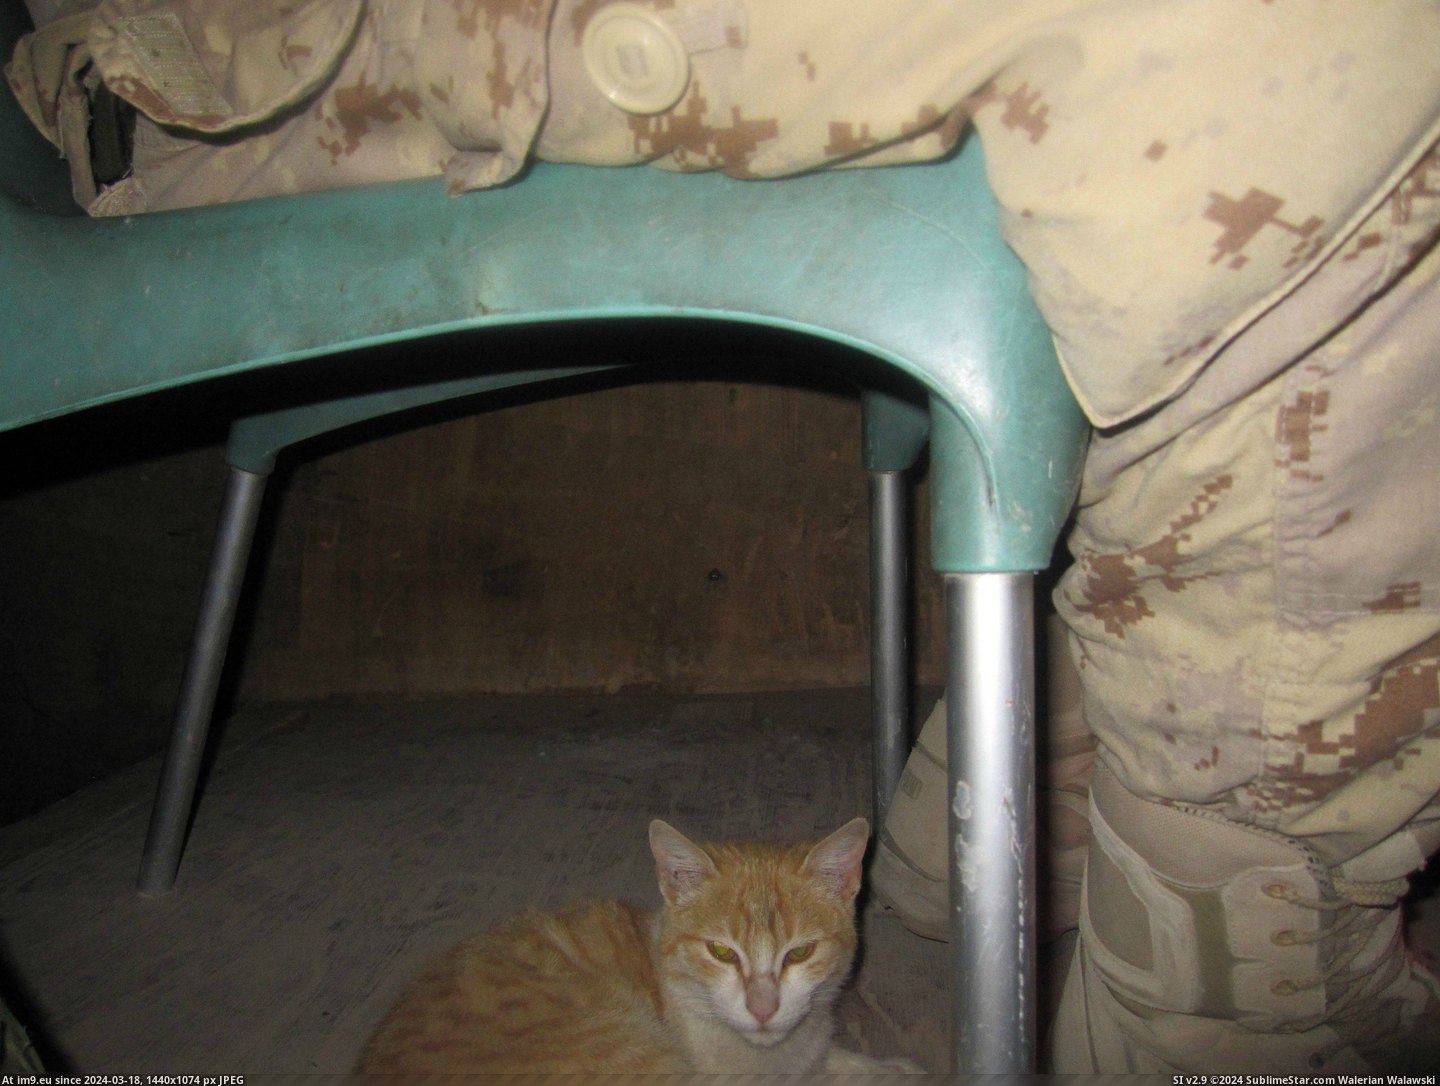 #Cats #Guard #Camp #Afghanistan #Cheetah #Tower #Helping [Cats] Tower Cheetah helping me guard my camp in Afghanistan. 8 Pic. (Изображение из альбом My r/CATS favs))